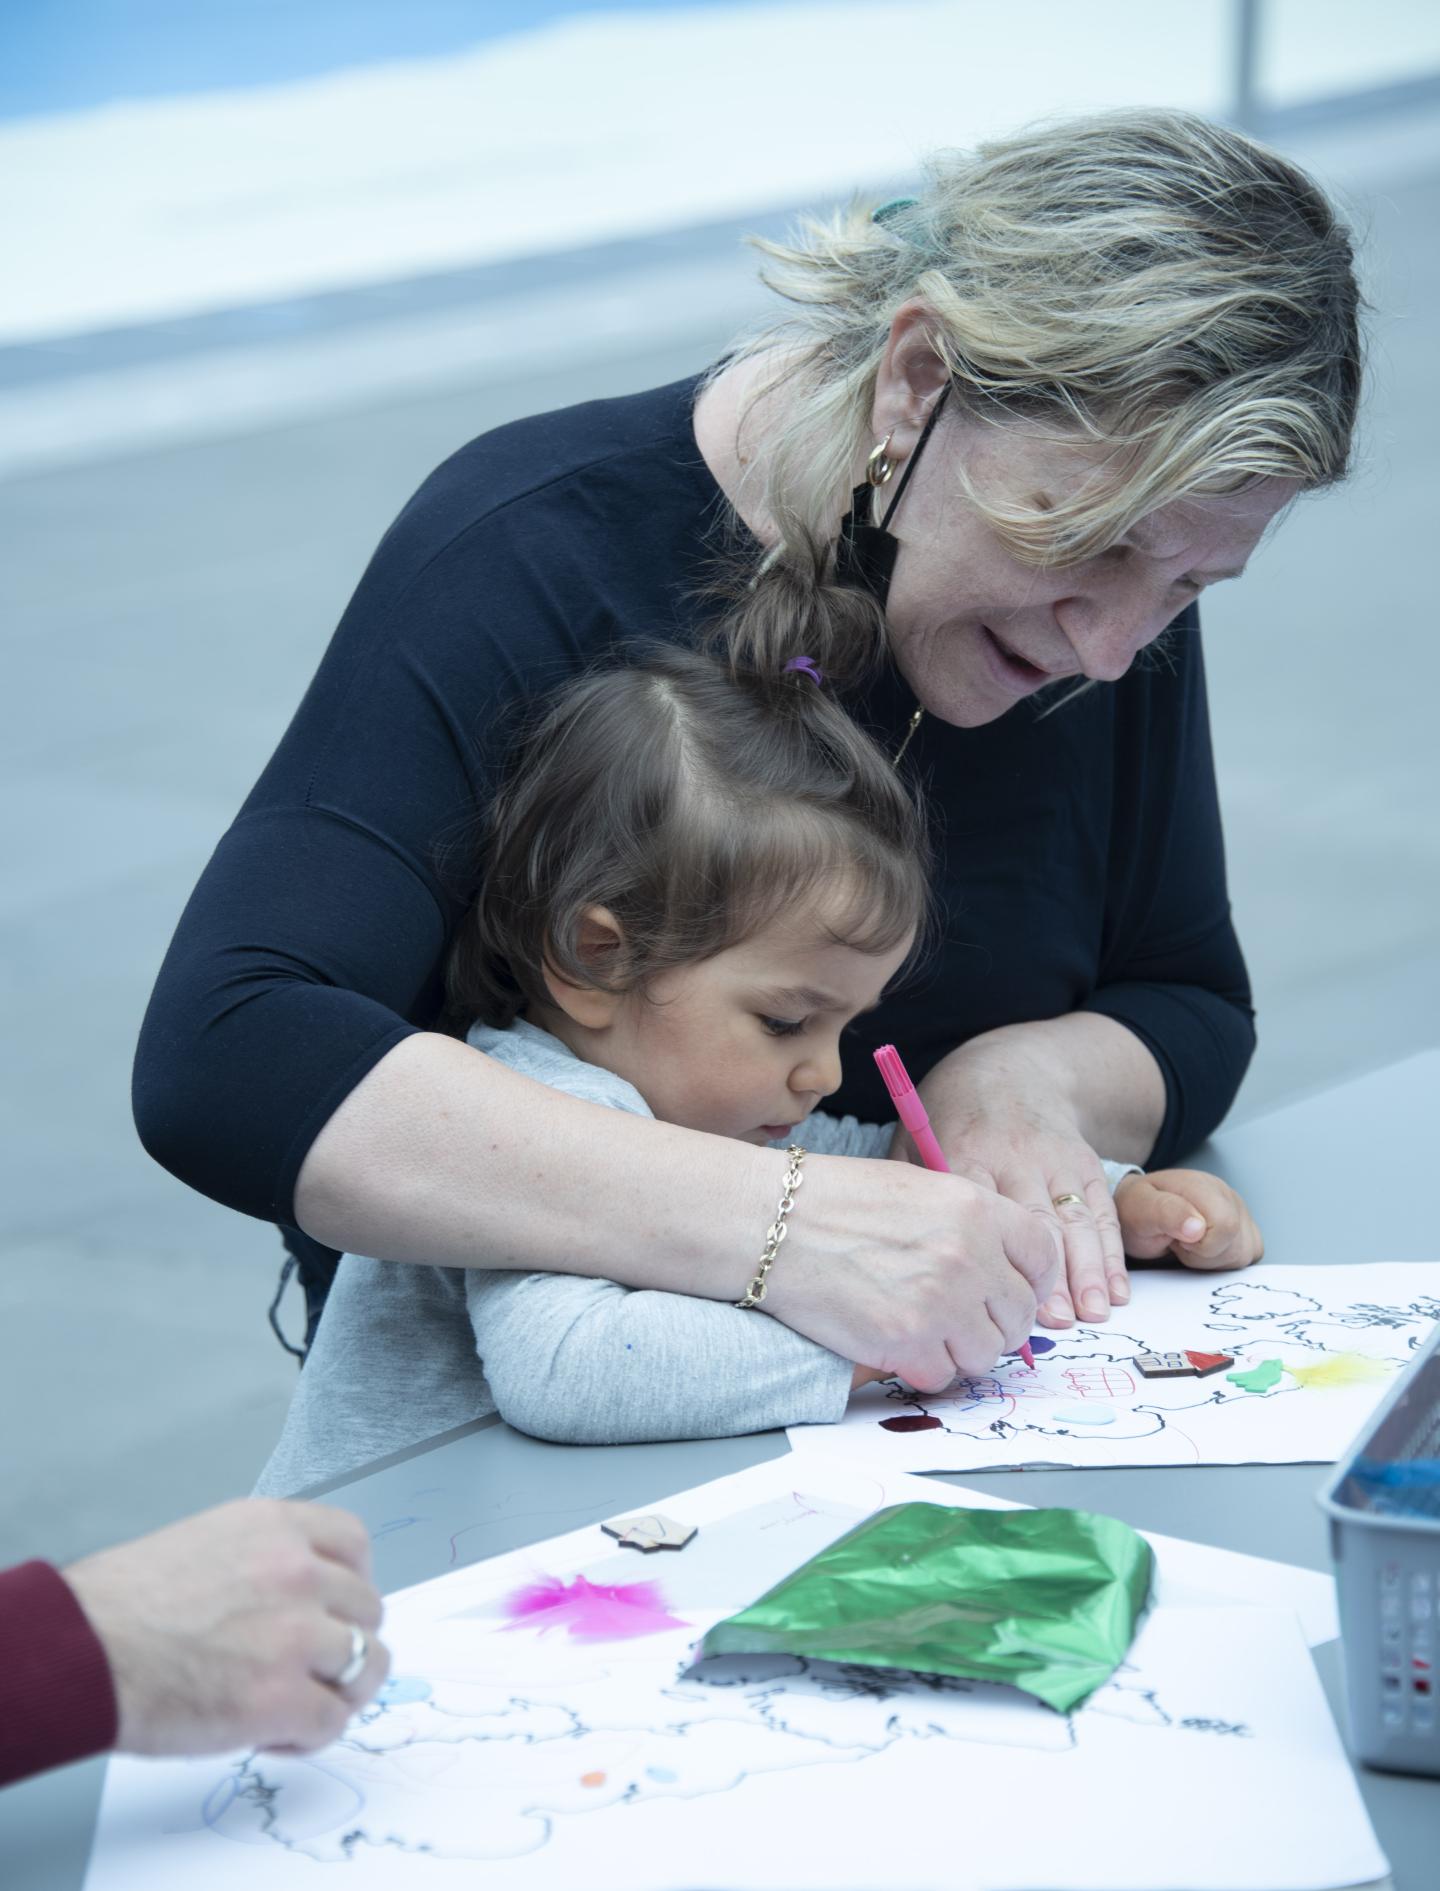 An adult and child draw together